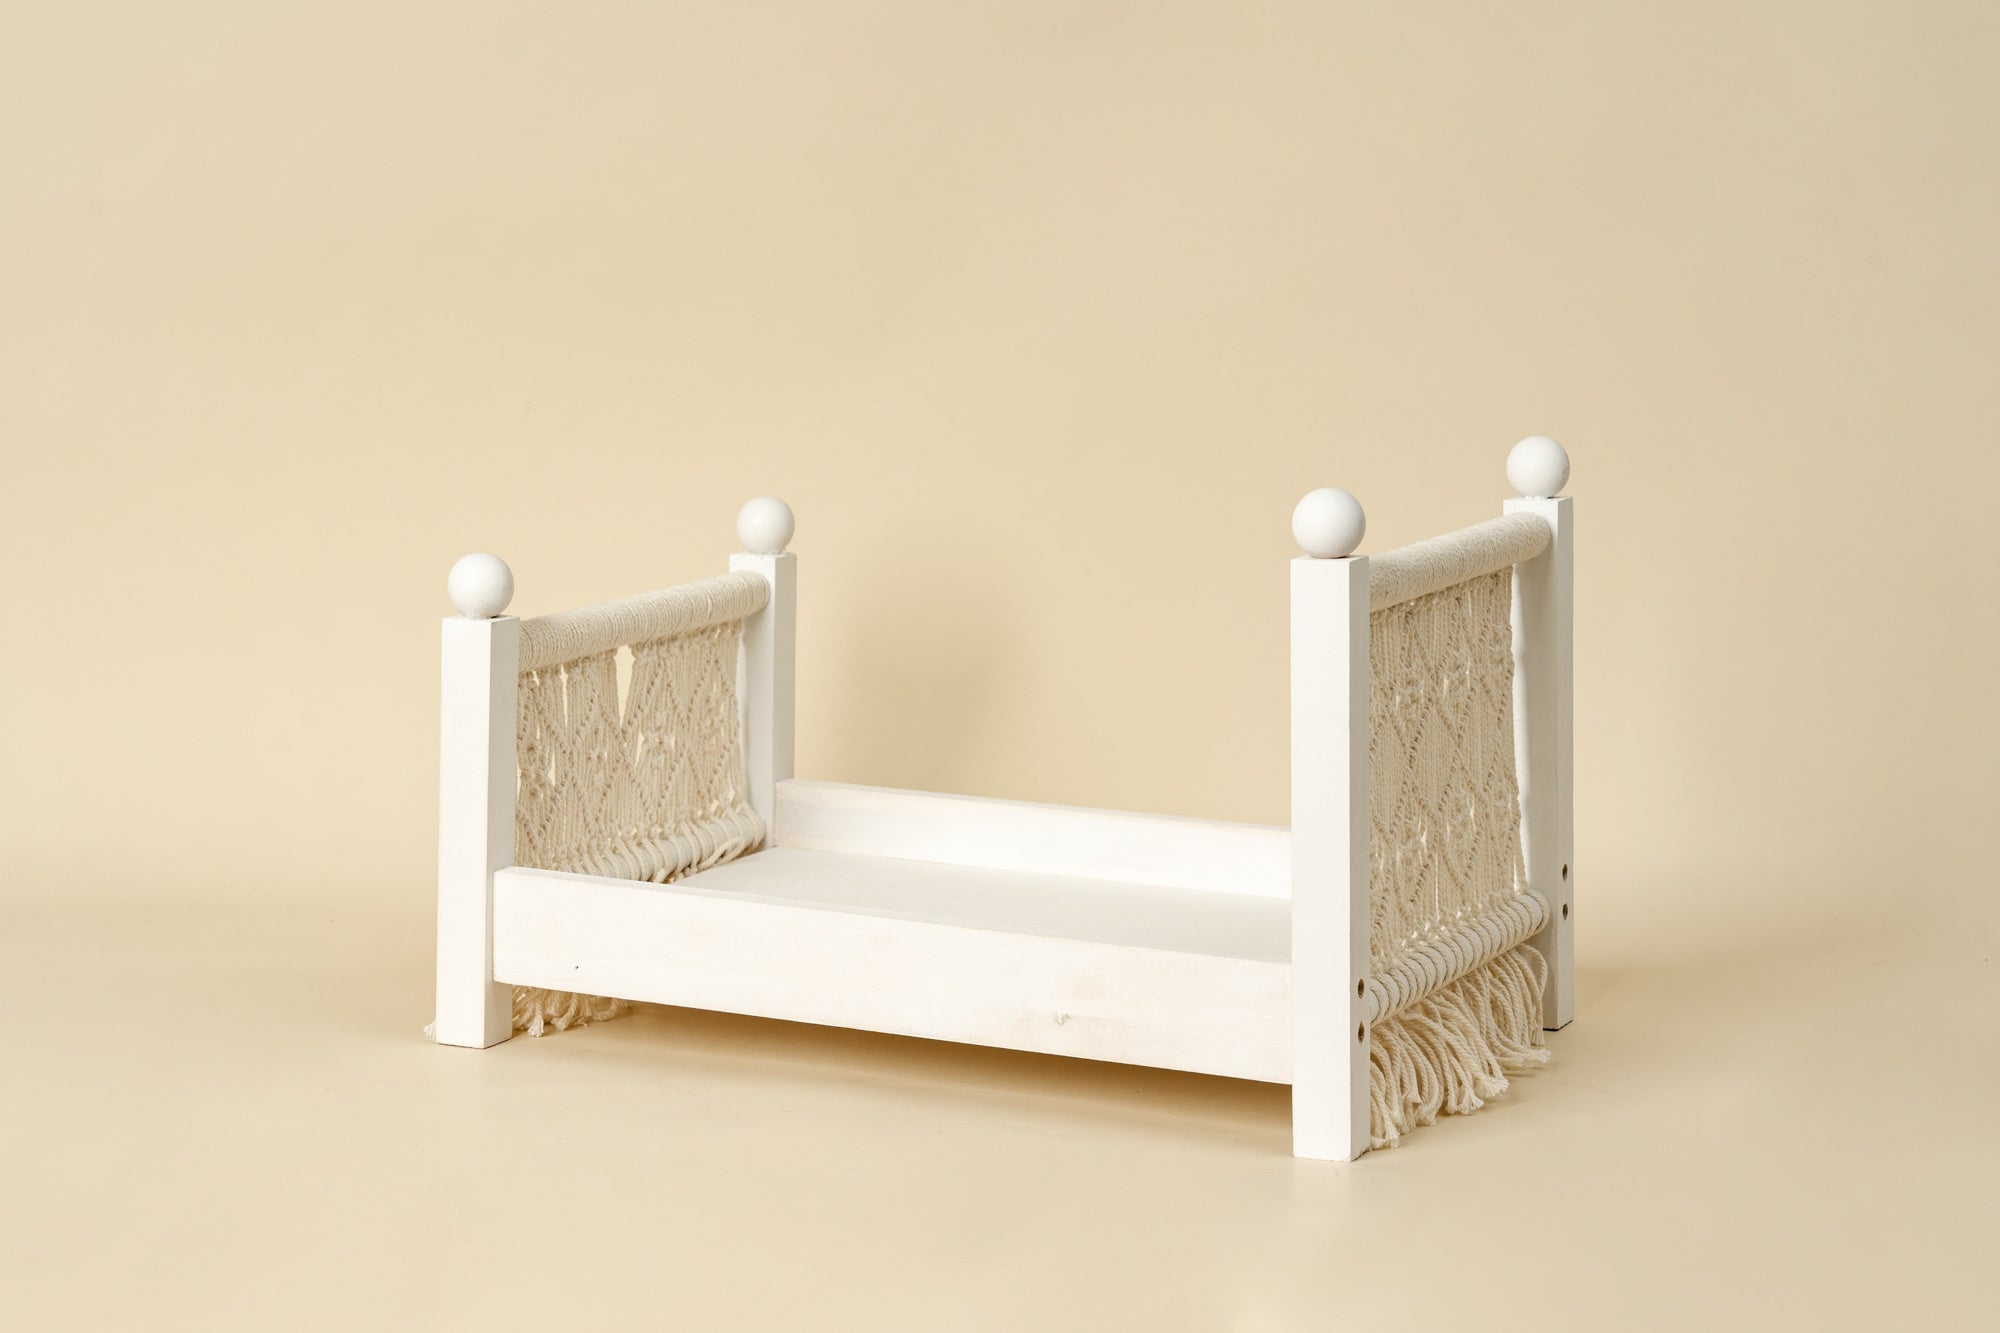 LONSALE Kate Newborn White Wooden Boho Bed Photography Props